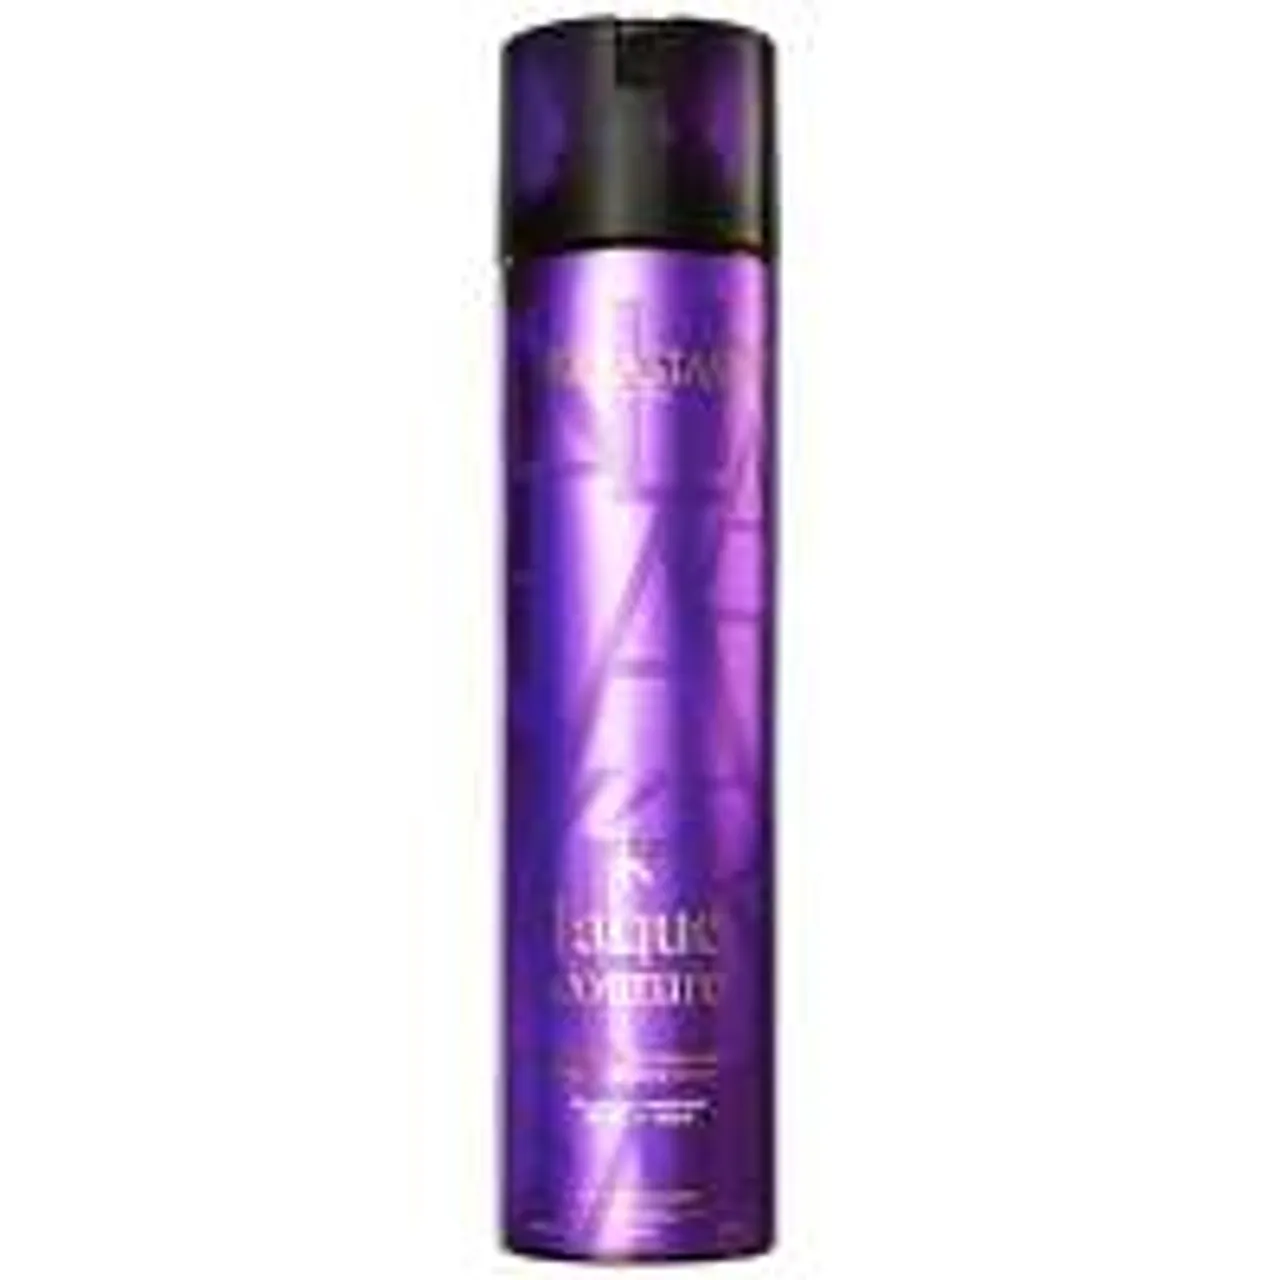 Kerastase Couture Styling Laque Couture: Fixation Medium Hold Hairspray 300ml